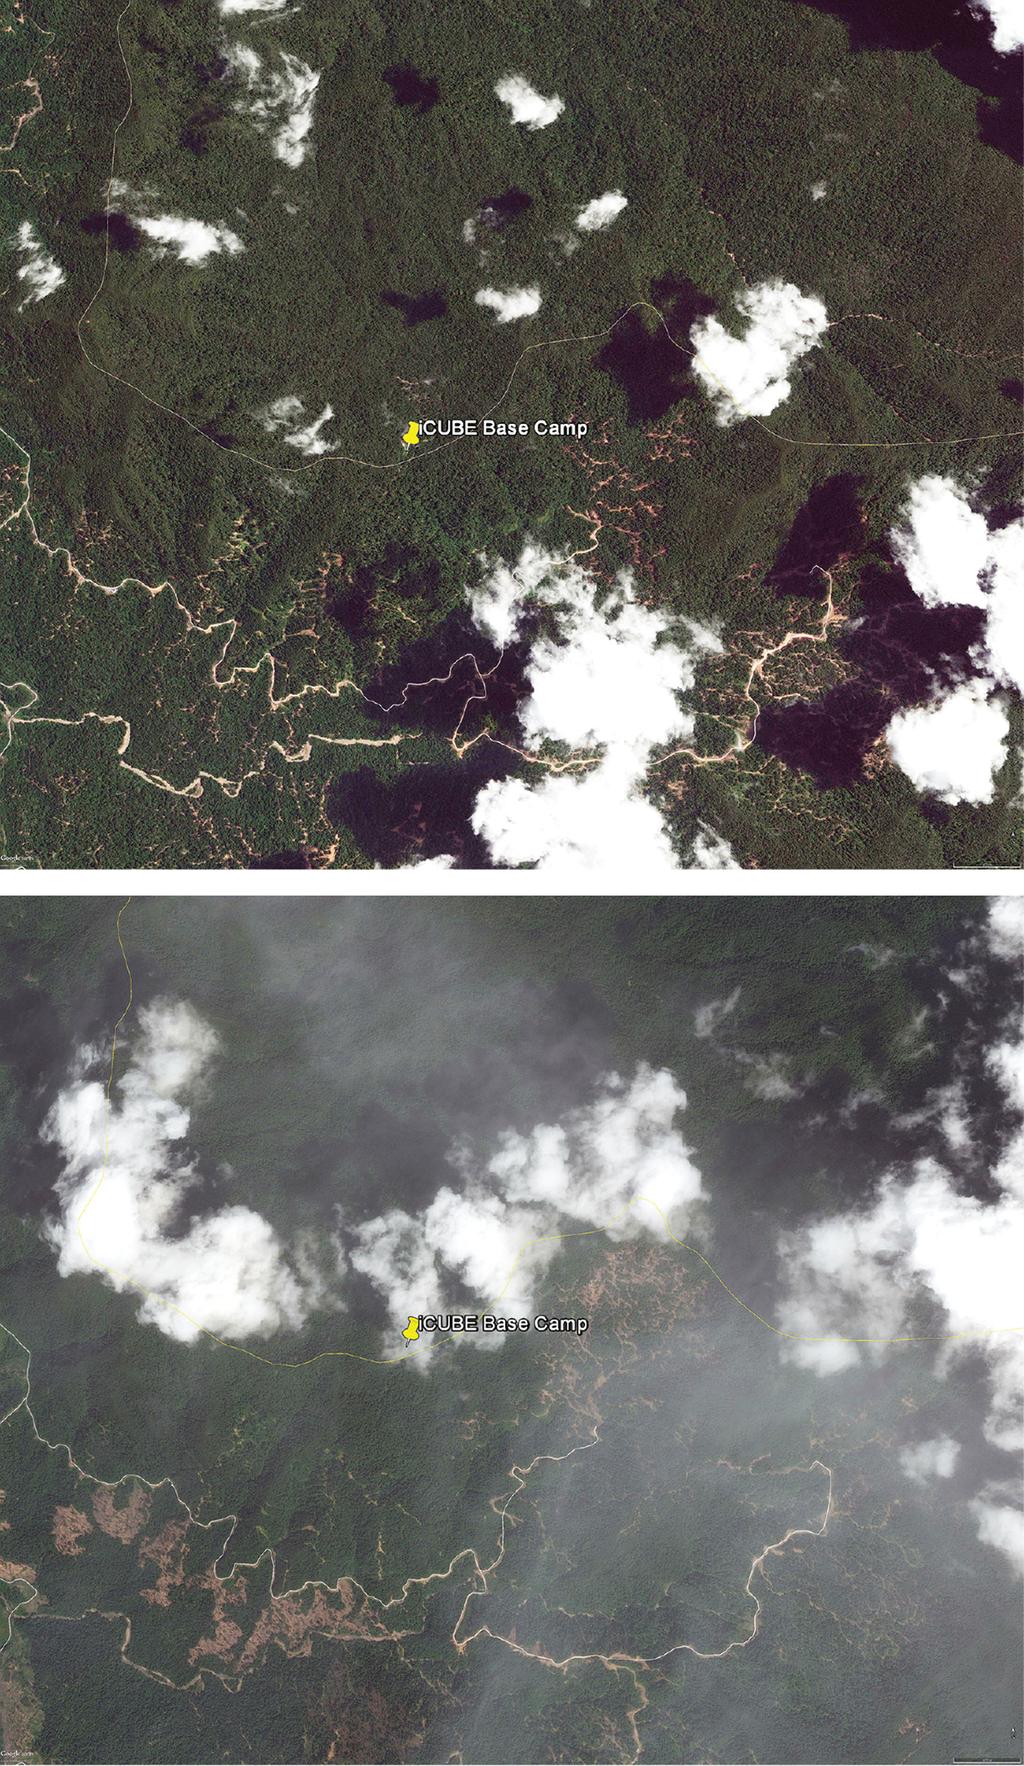 110 Bulletin of the Peabody Museum of Natural History 57(1) April 2016 FIGURE 5. Satellite images from 2012 (above) and 2013 (below) of the border of Brunei Darussalam and Sarawak.